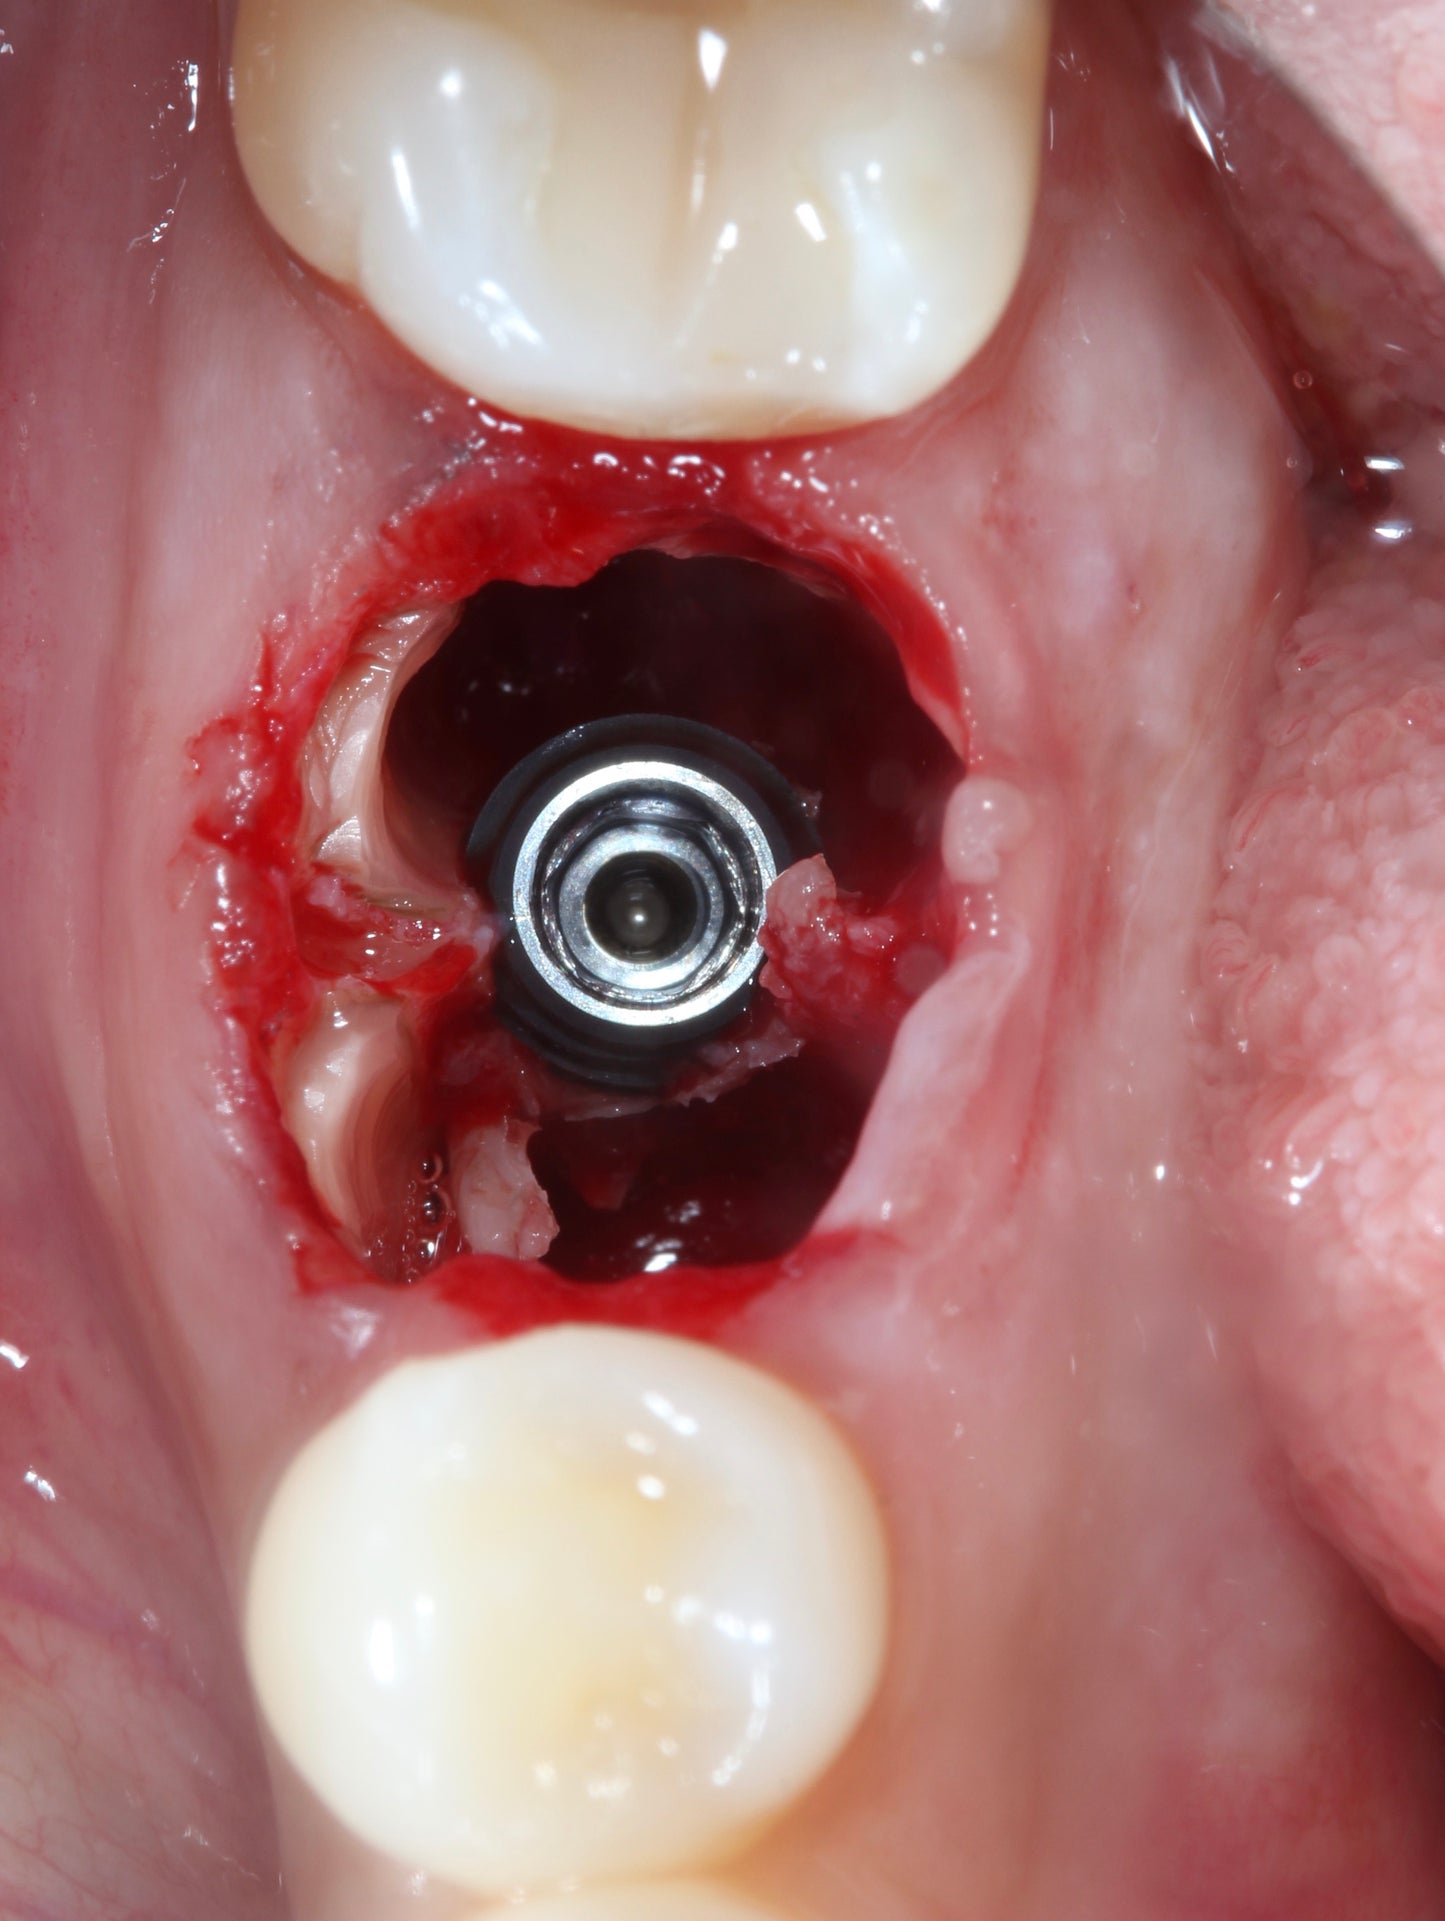 3P's of Partial Extraction Therapy: Preparation, Procedure, and Provisionals